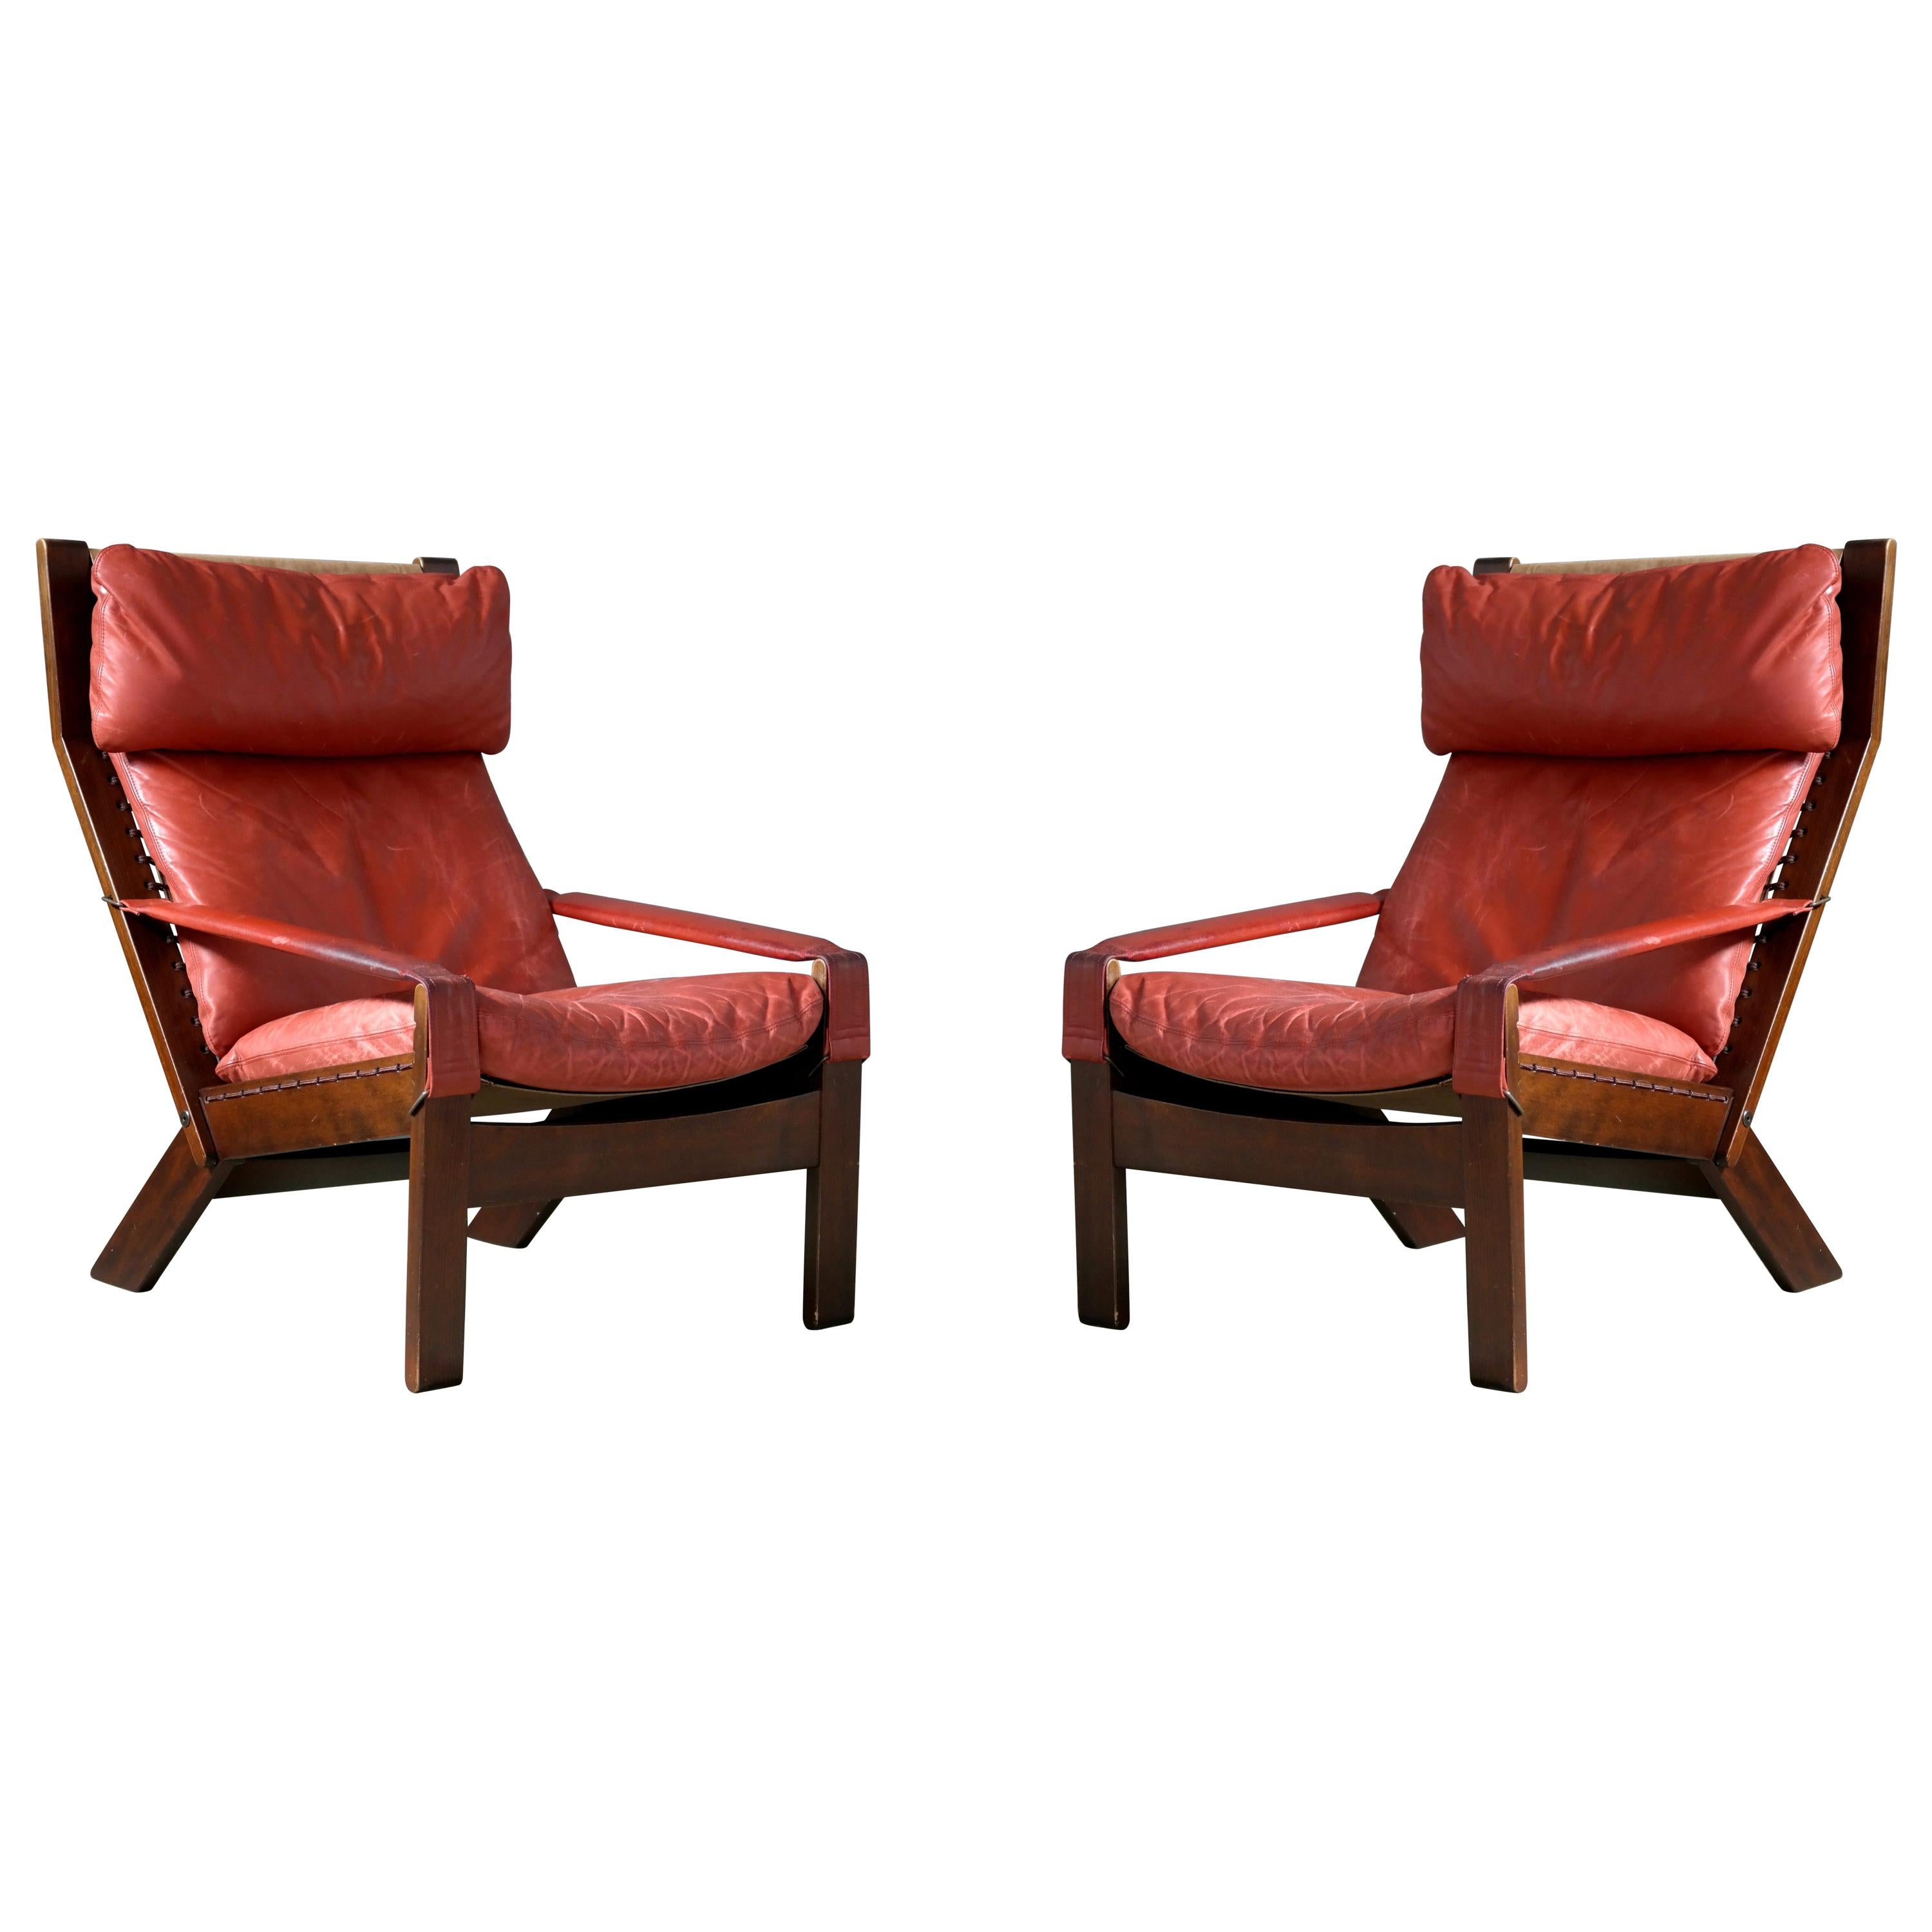 Pair of Sigurd Ressell Midcentury Reclining Leather Lounge Chairs for Westnofa